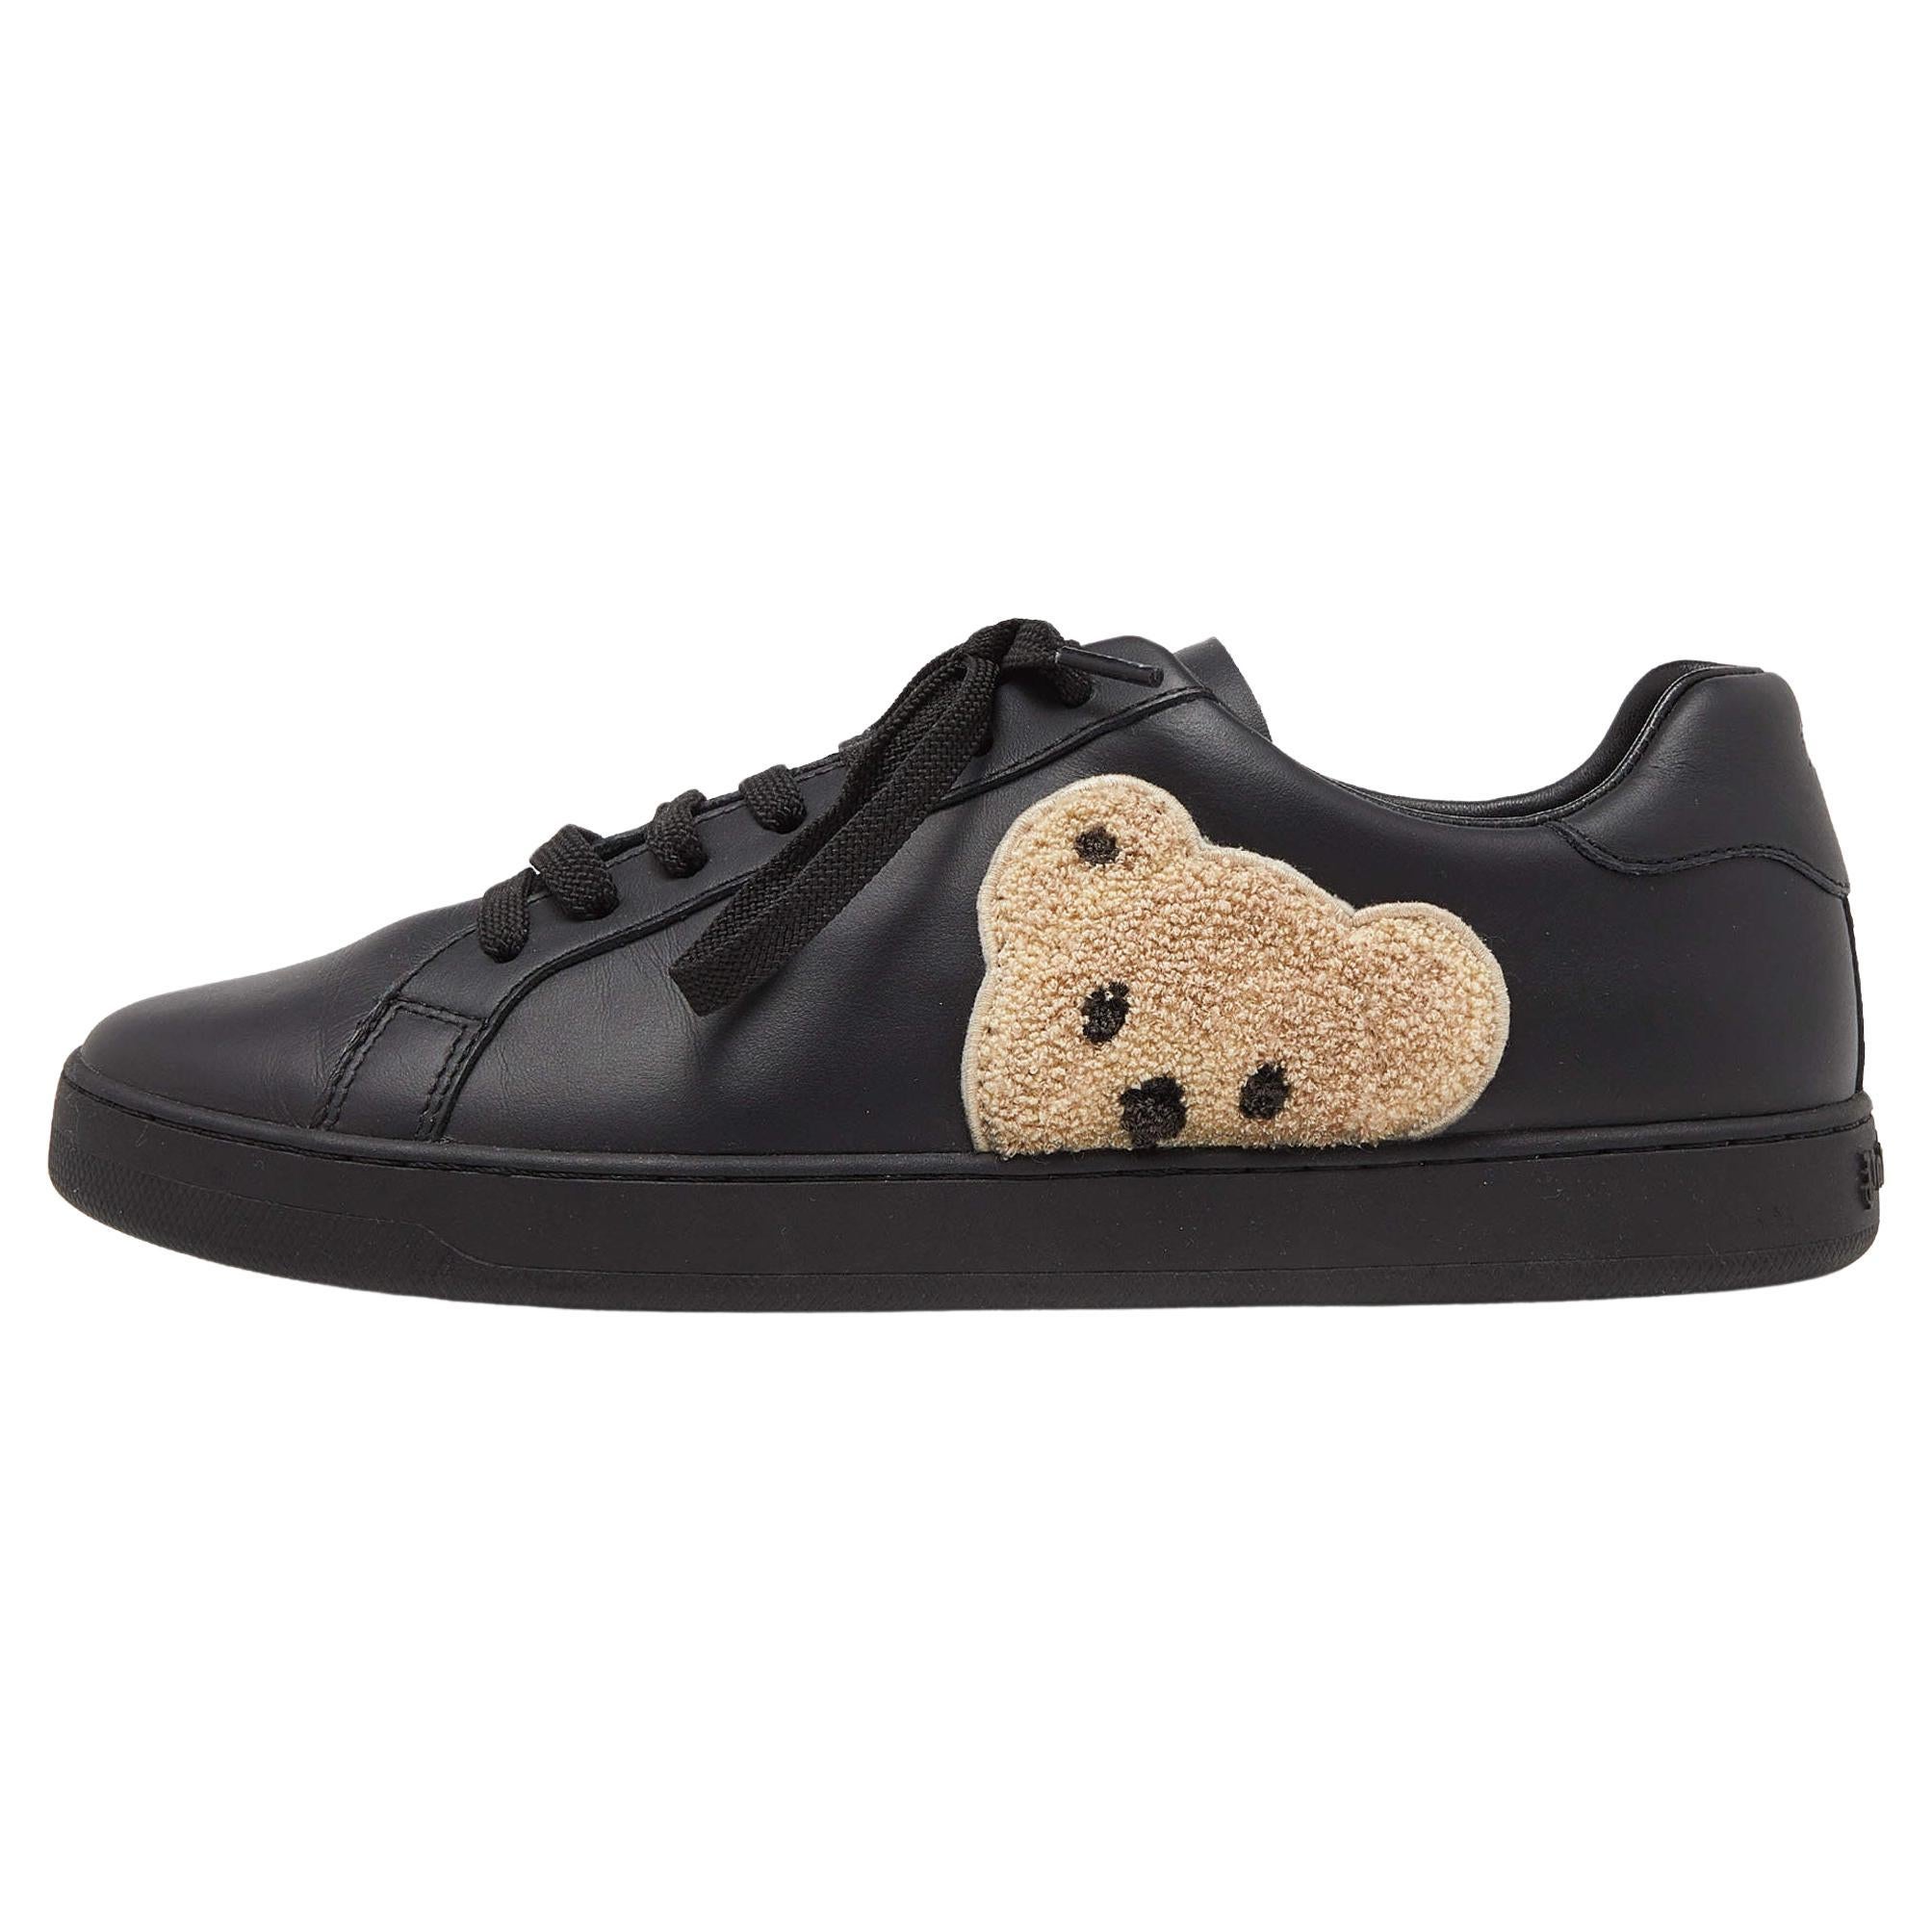 Palm Angels Black Leather Teddy Low Top Sneakers Size 42 For Sale